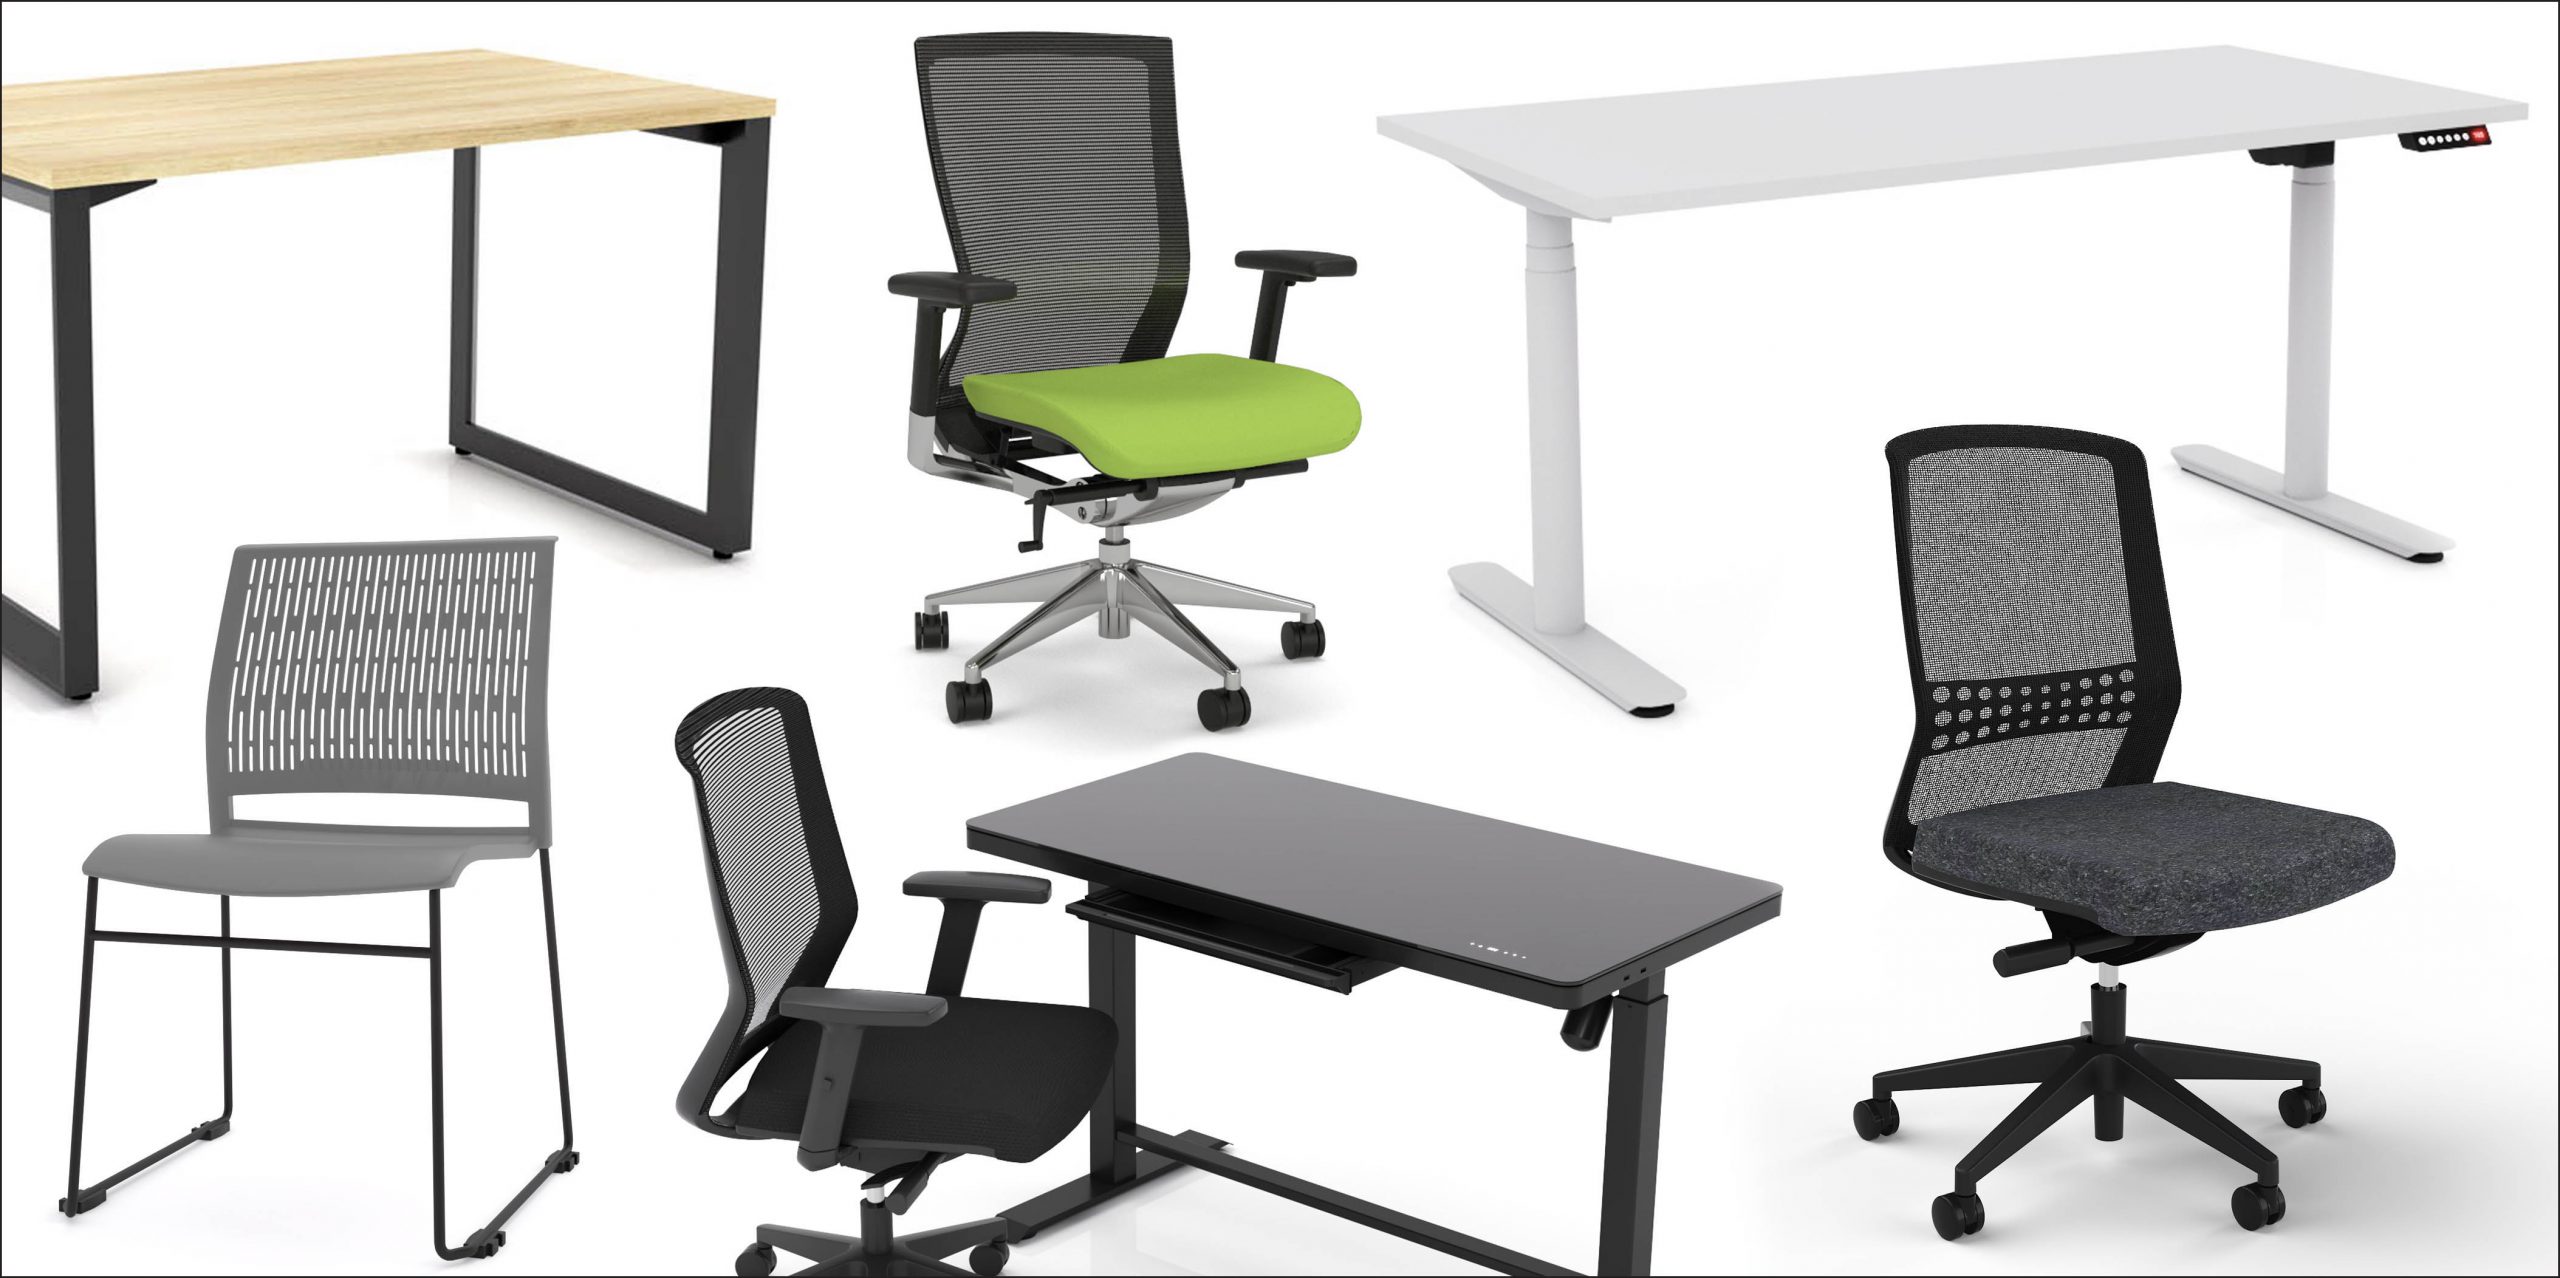 The Top 5 Must-Have Office Furniture Pieces for Productivity